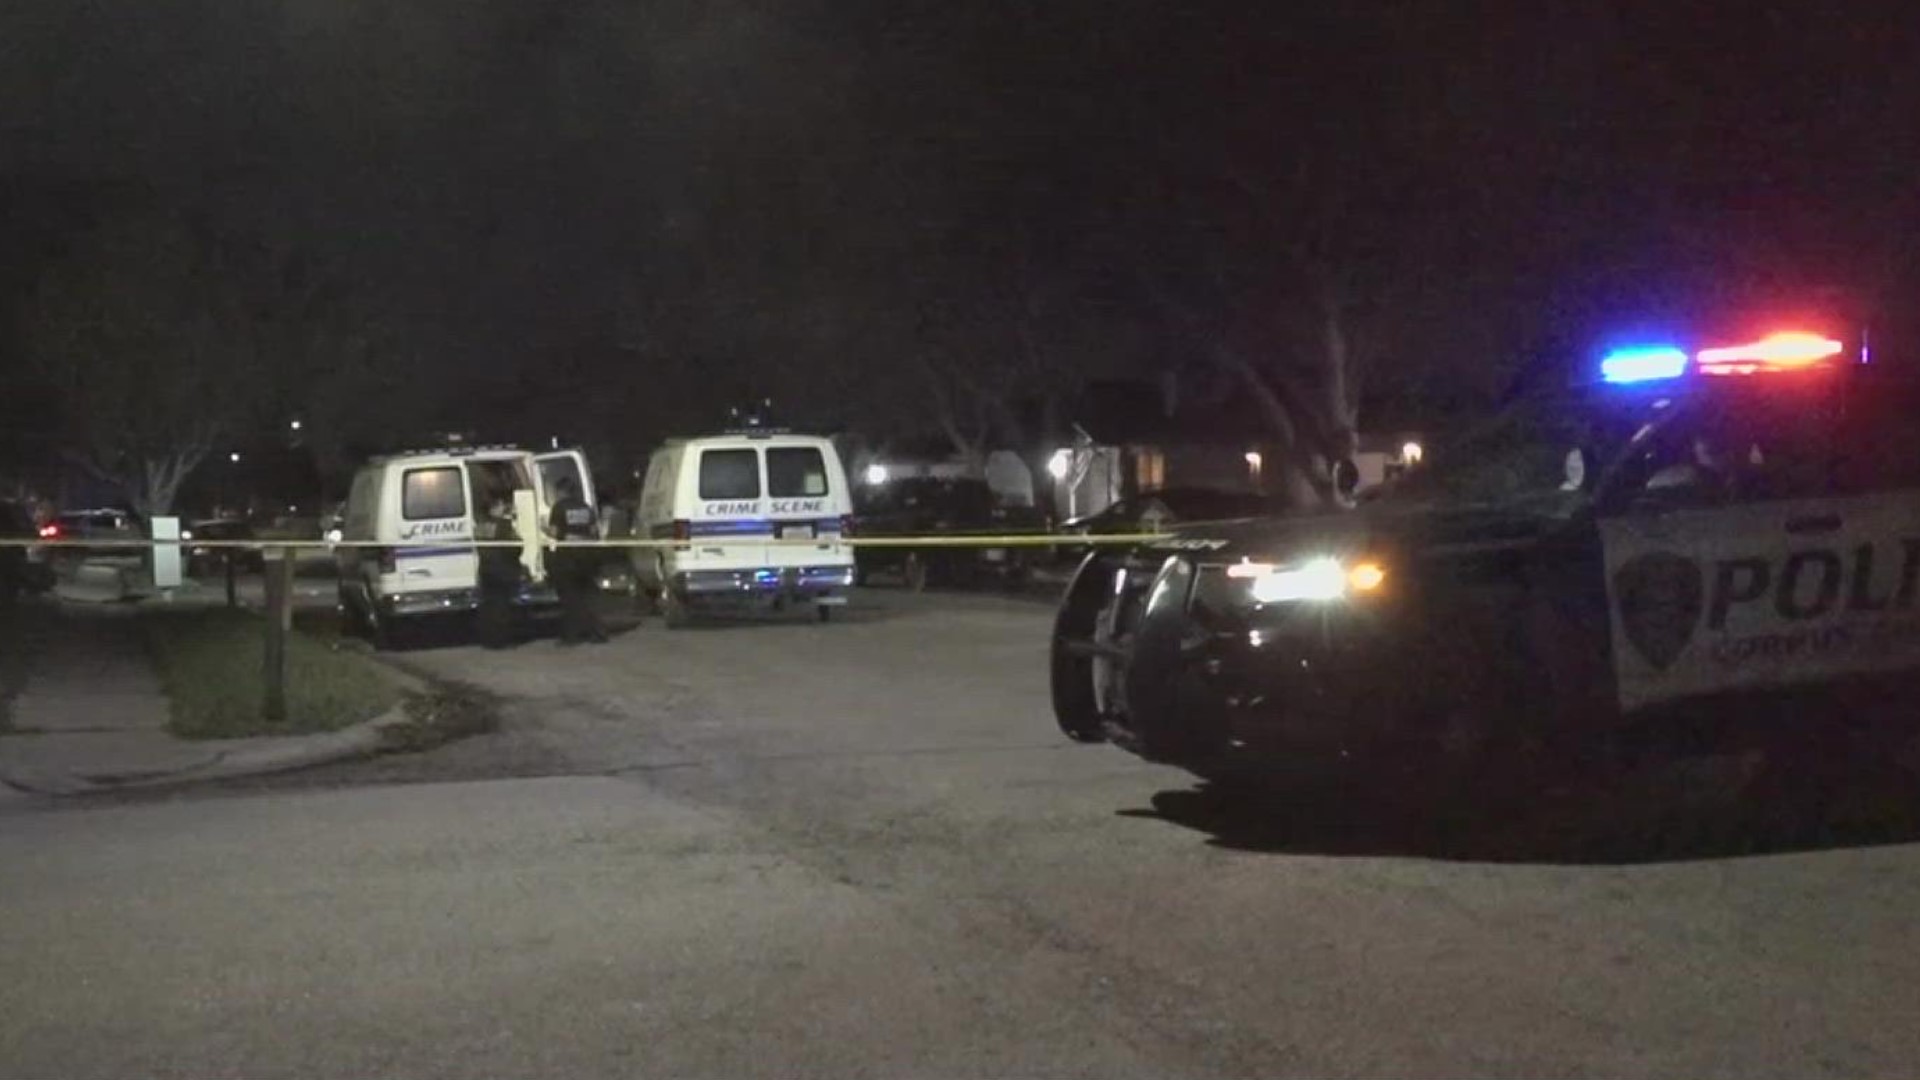 Corpus Christi police said a 20-year-old woman was killed in the shooting.